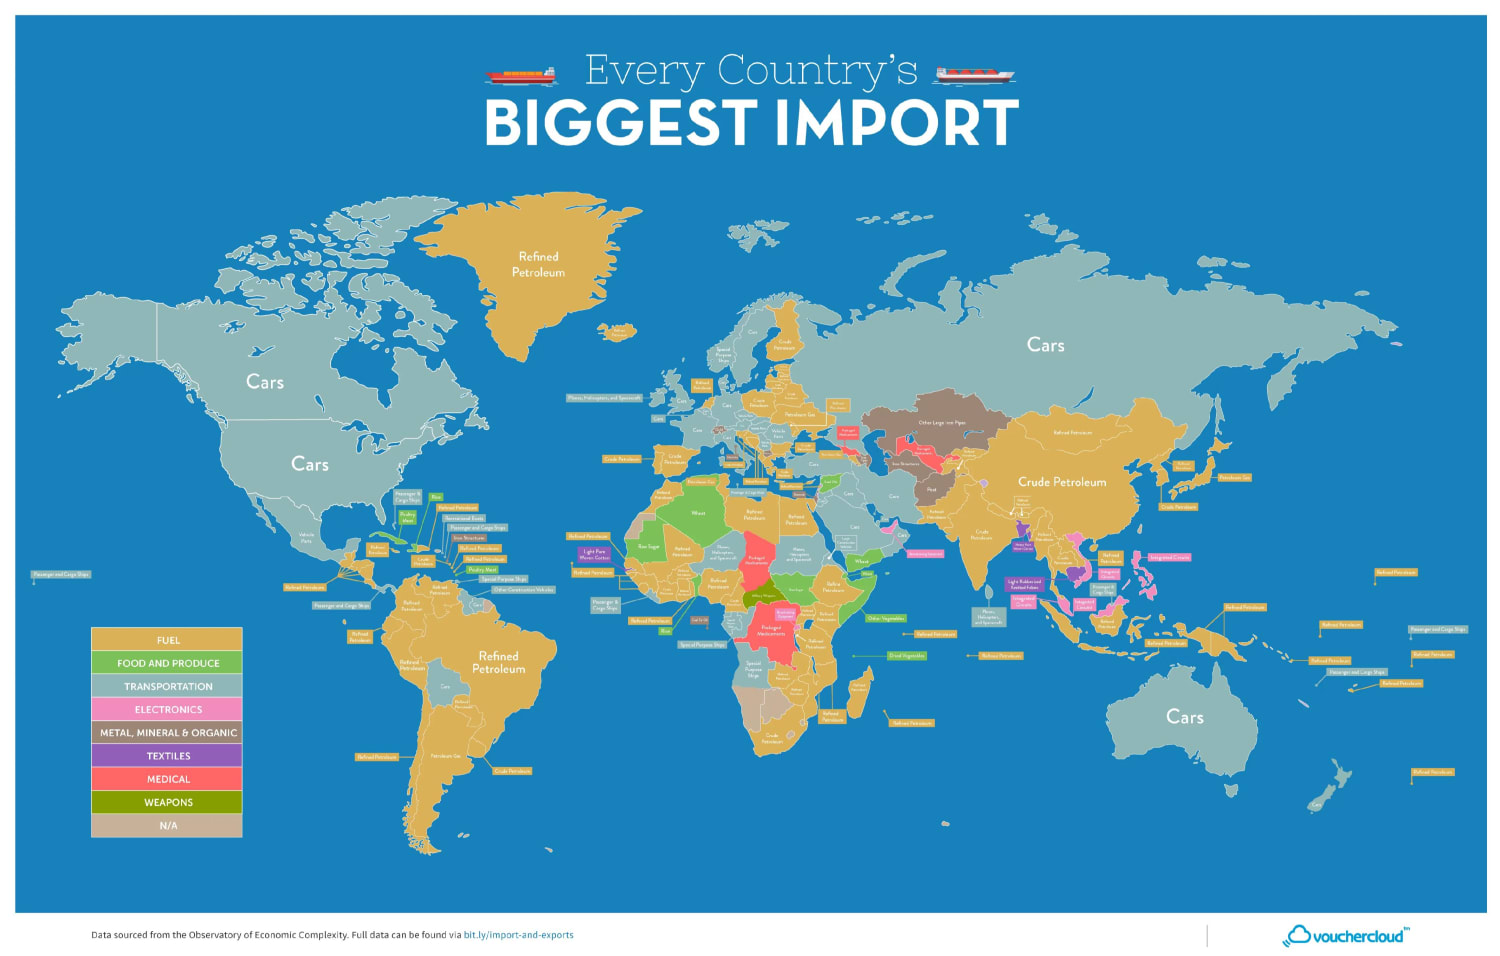 Every country’s biggest import